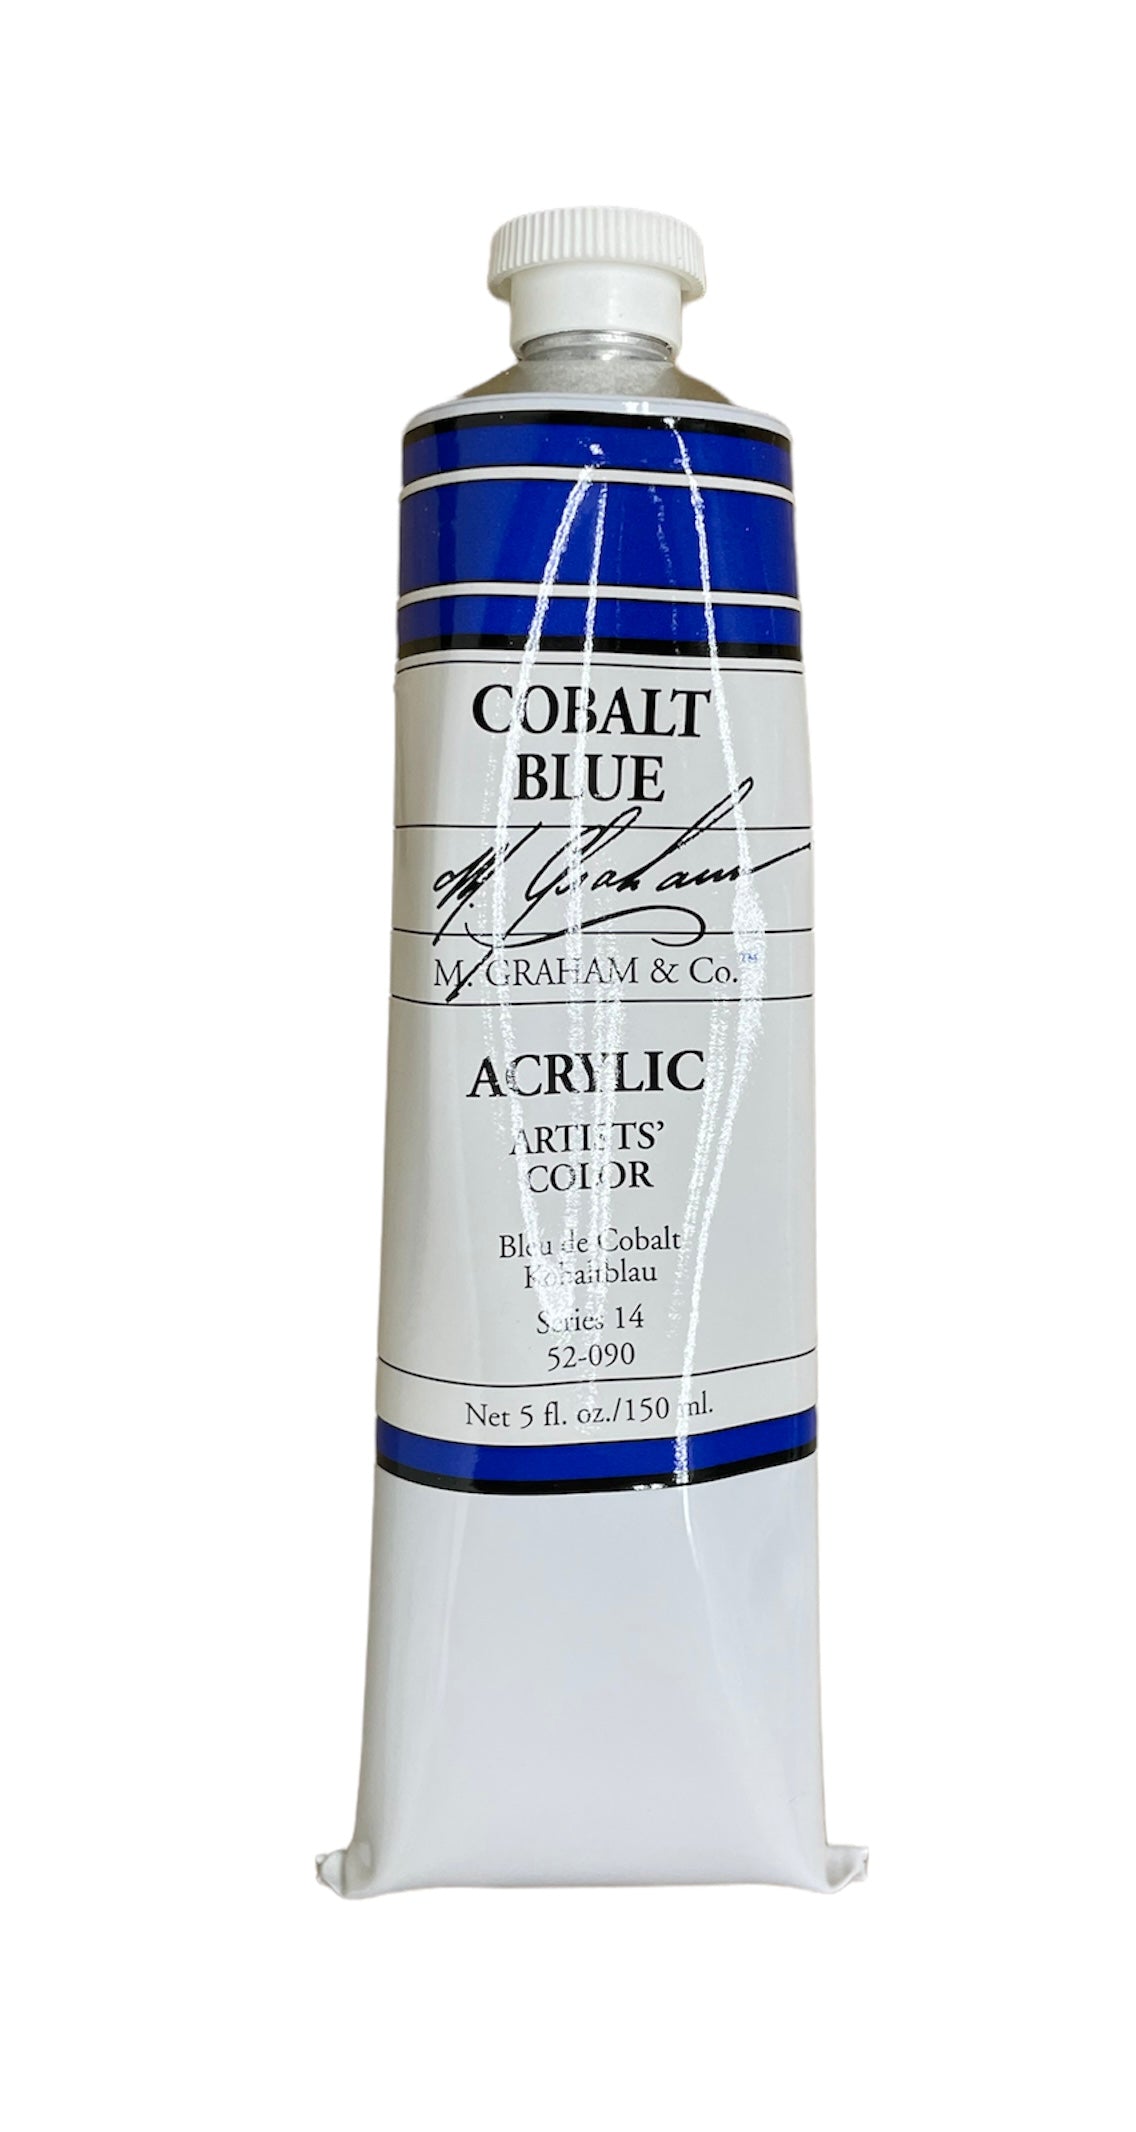 M. Graham Acrylic Cobalt Blue  in 150ml. Available in Drawing Etc. Art Supplies store, Singapore